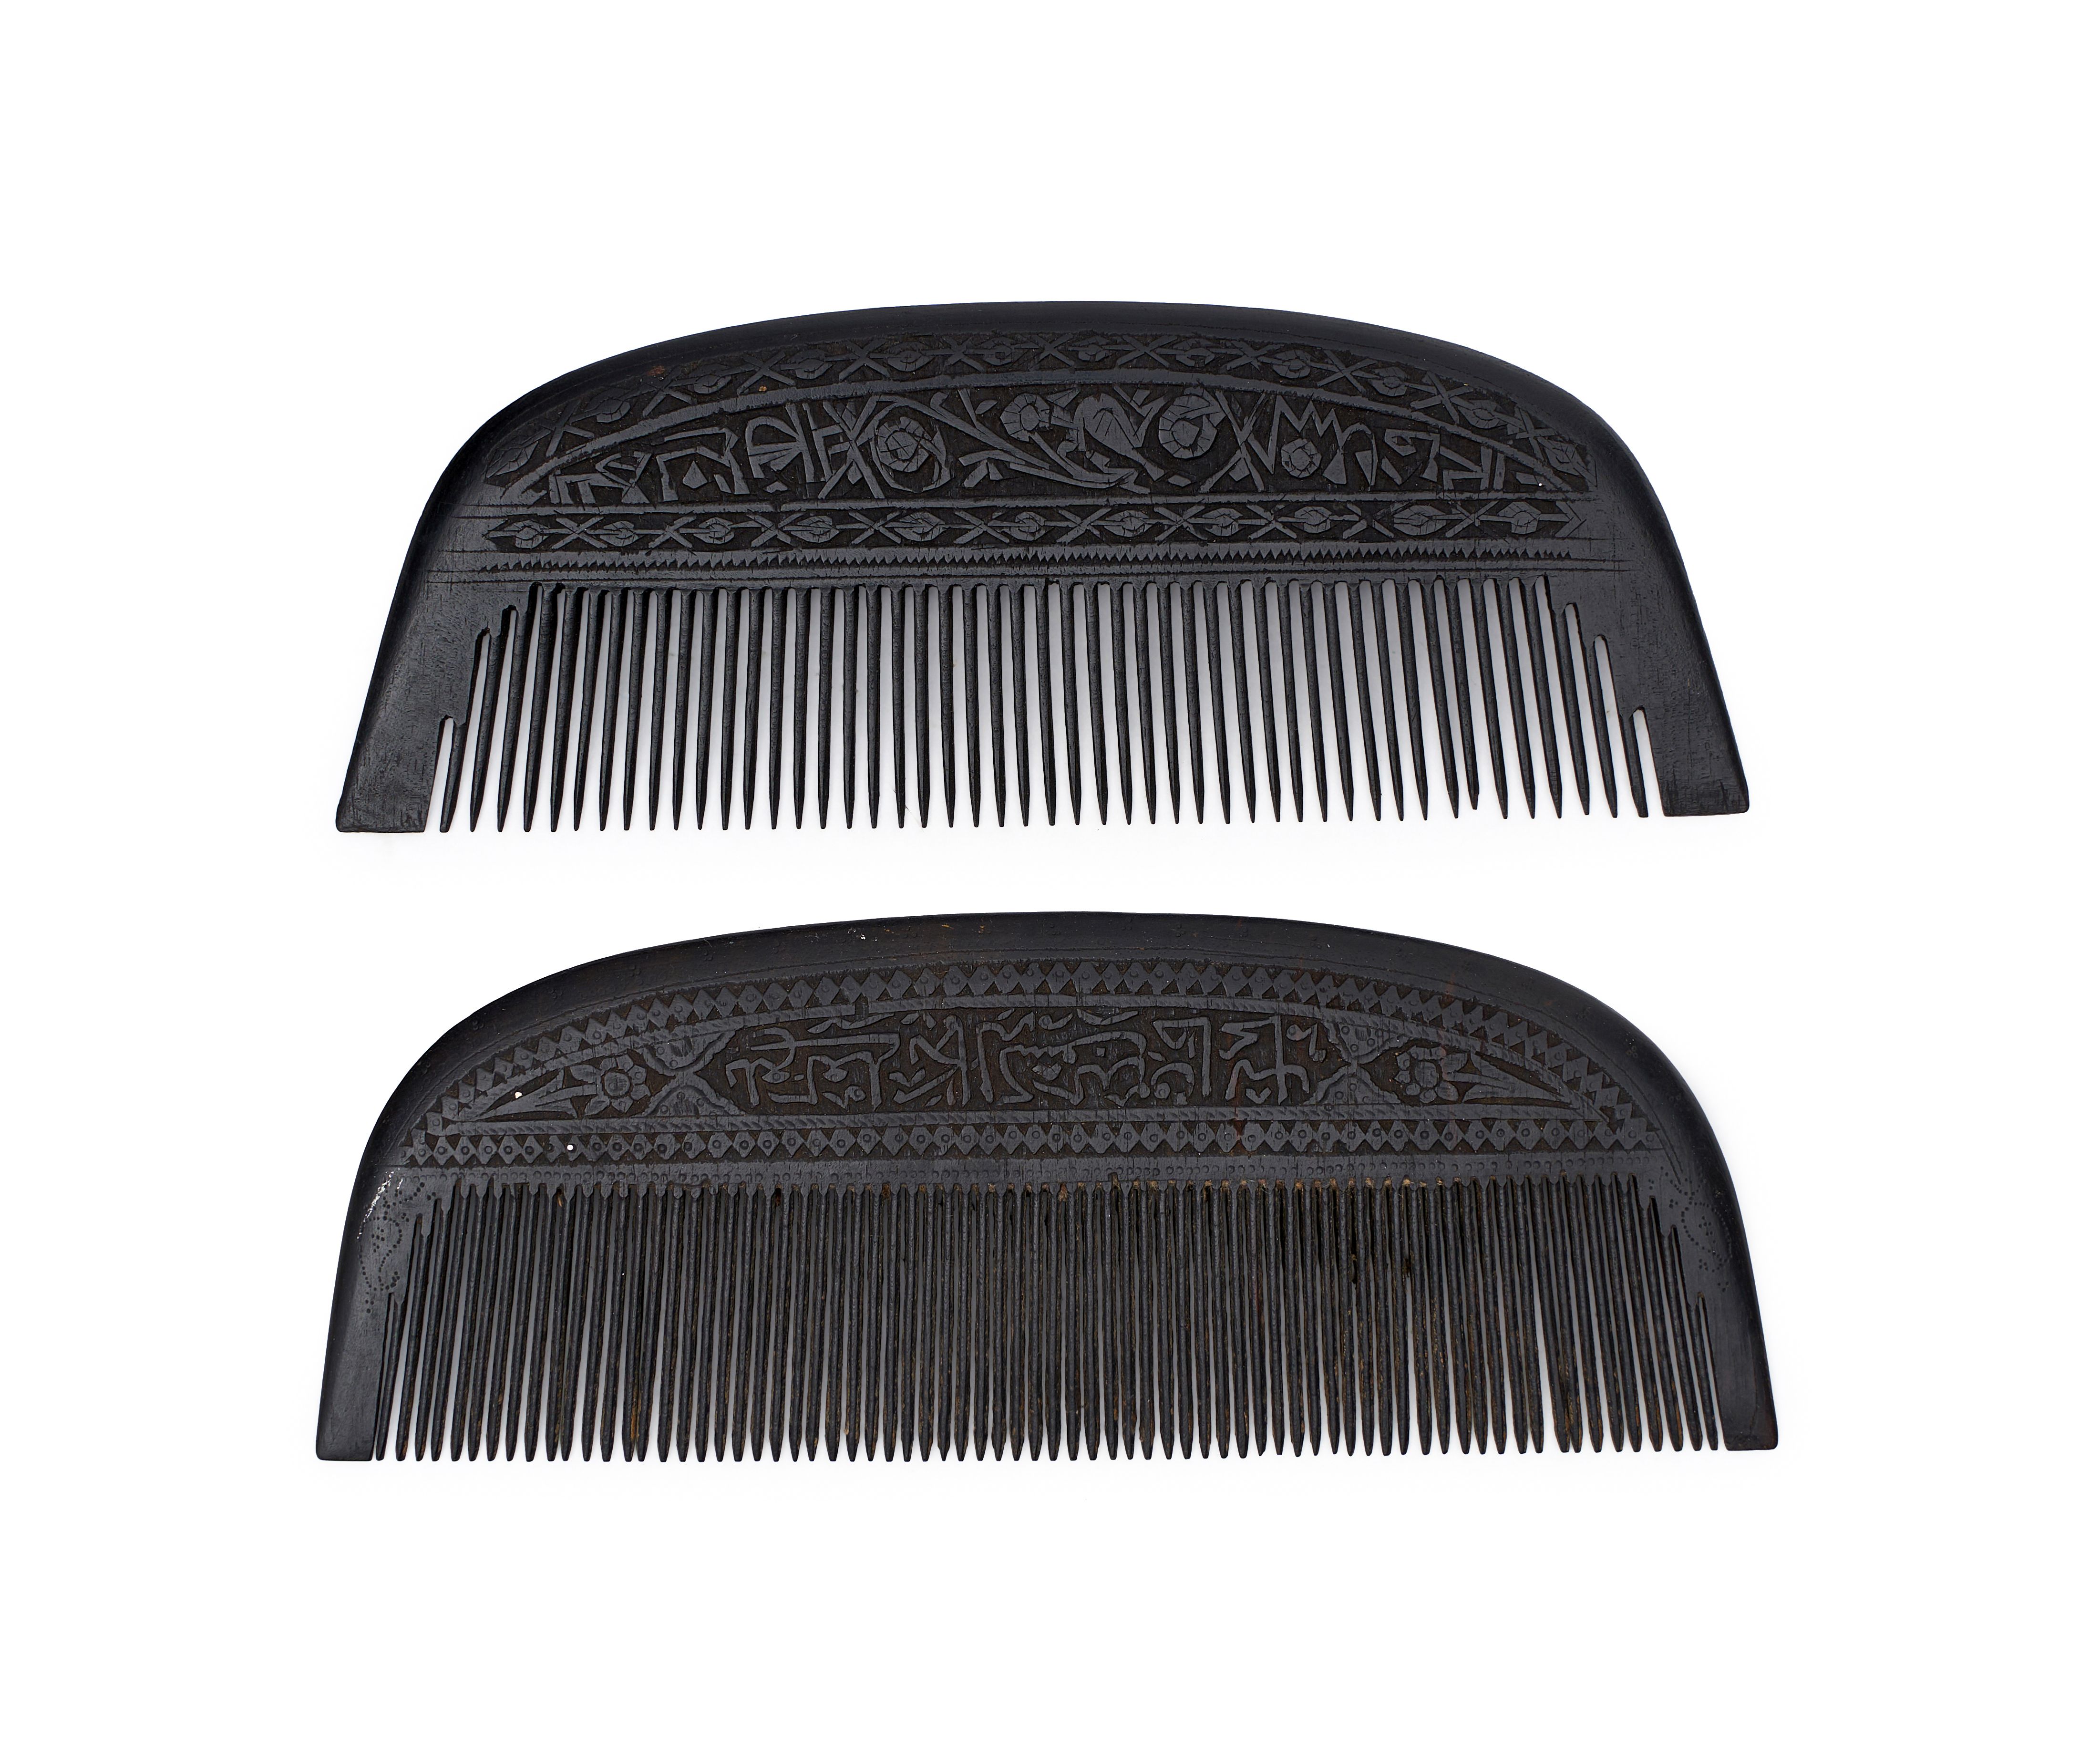 A PAIR OF INSCRIBED CALLIGRAPHIC WOODEN COMBS, SAFAVID, 17TH CENTURY, IRAN